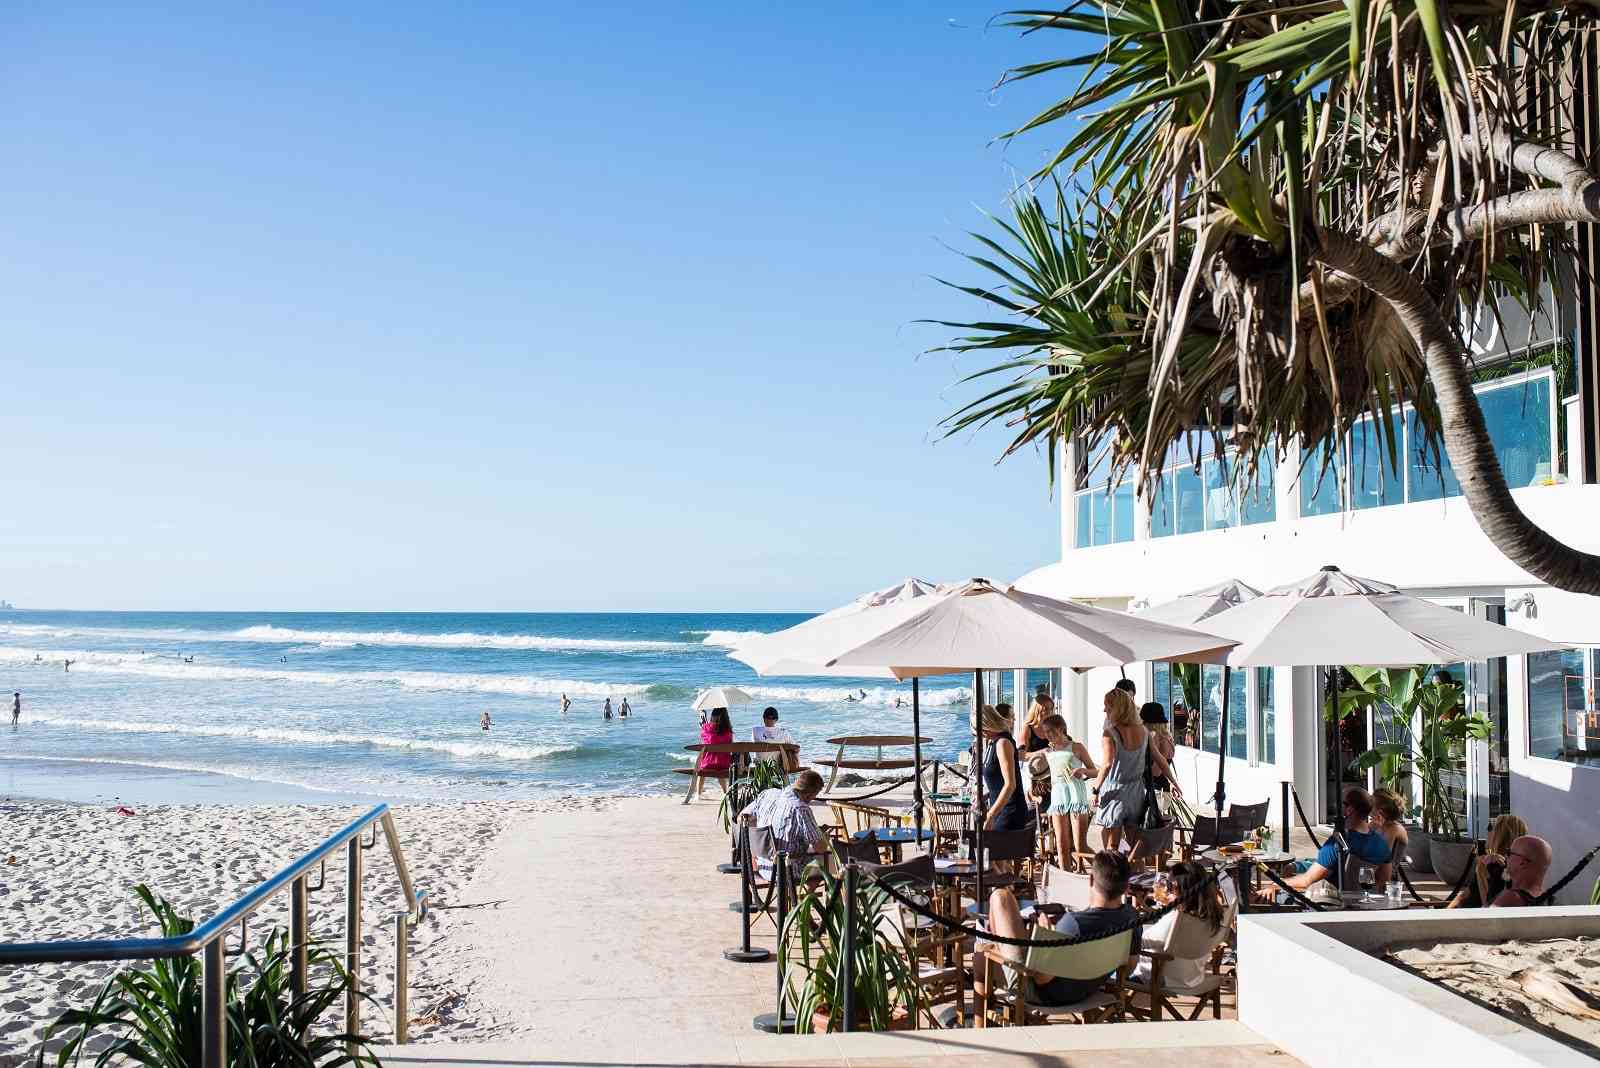 A TASTY GUIDE TO OUTDOOR DINING ON THE GOLD COAST